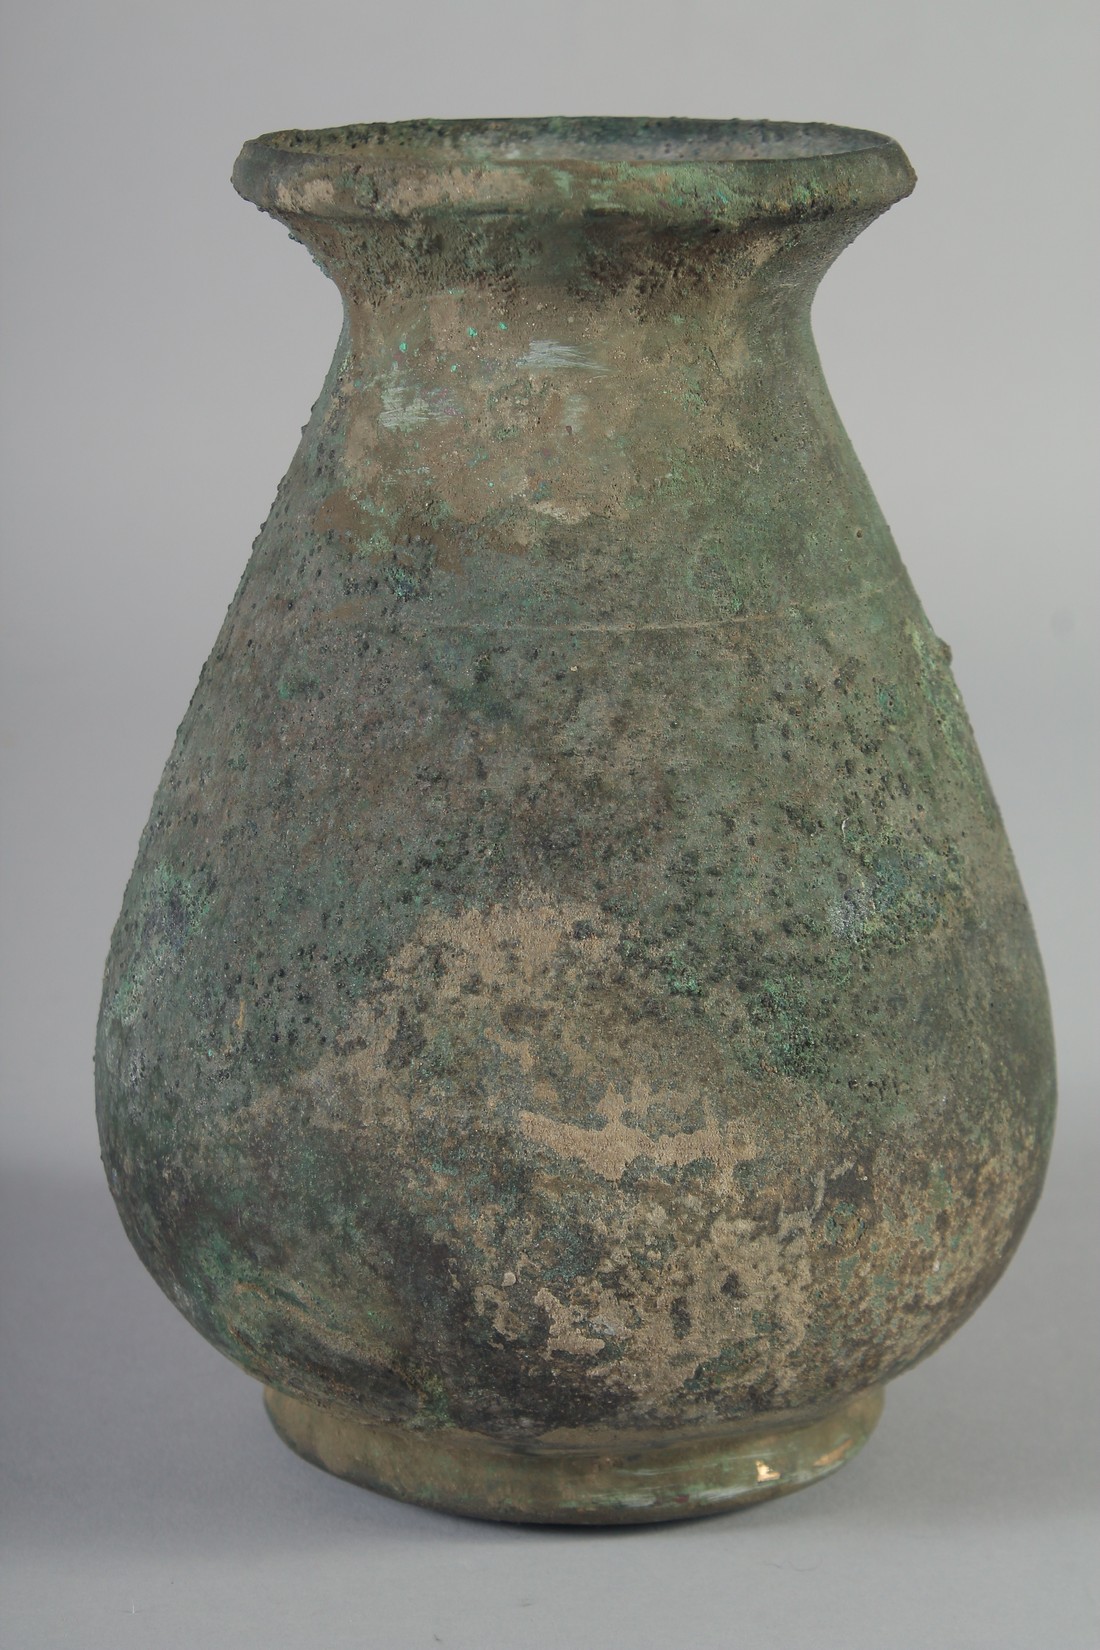 AN UNUSUAL ANCIENT PERSIAN OR ROMAN VASE, 19.5cm high. - Image 3 of 5